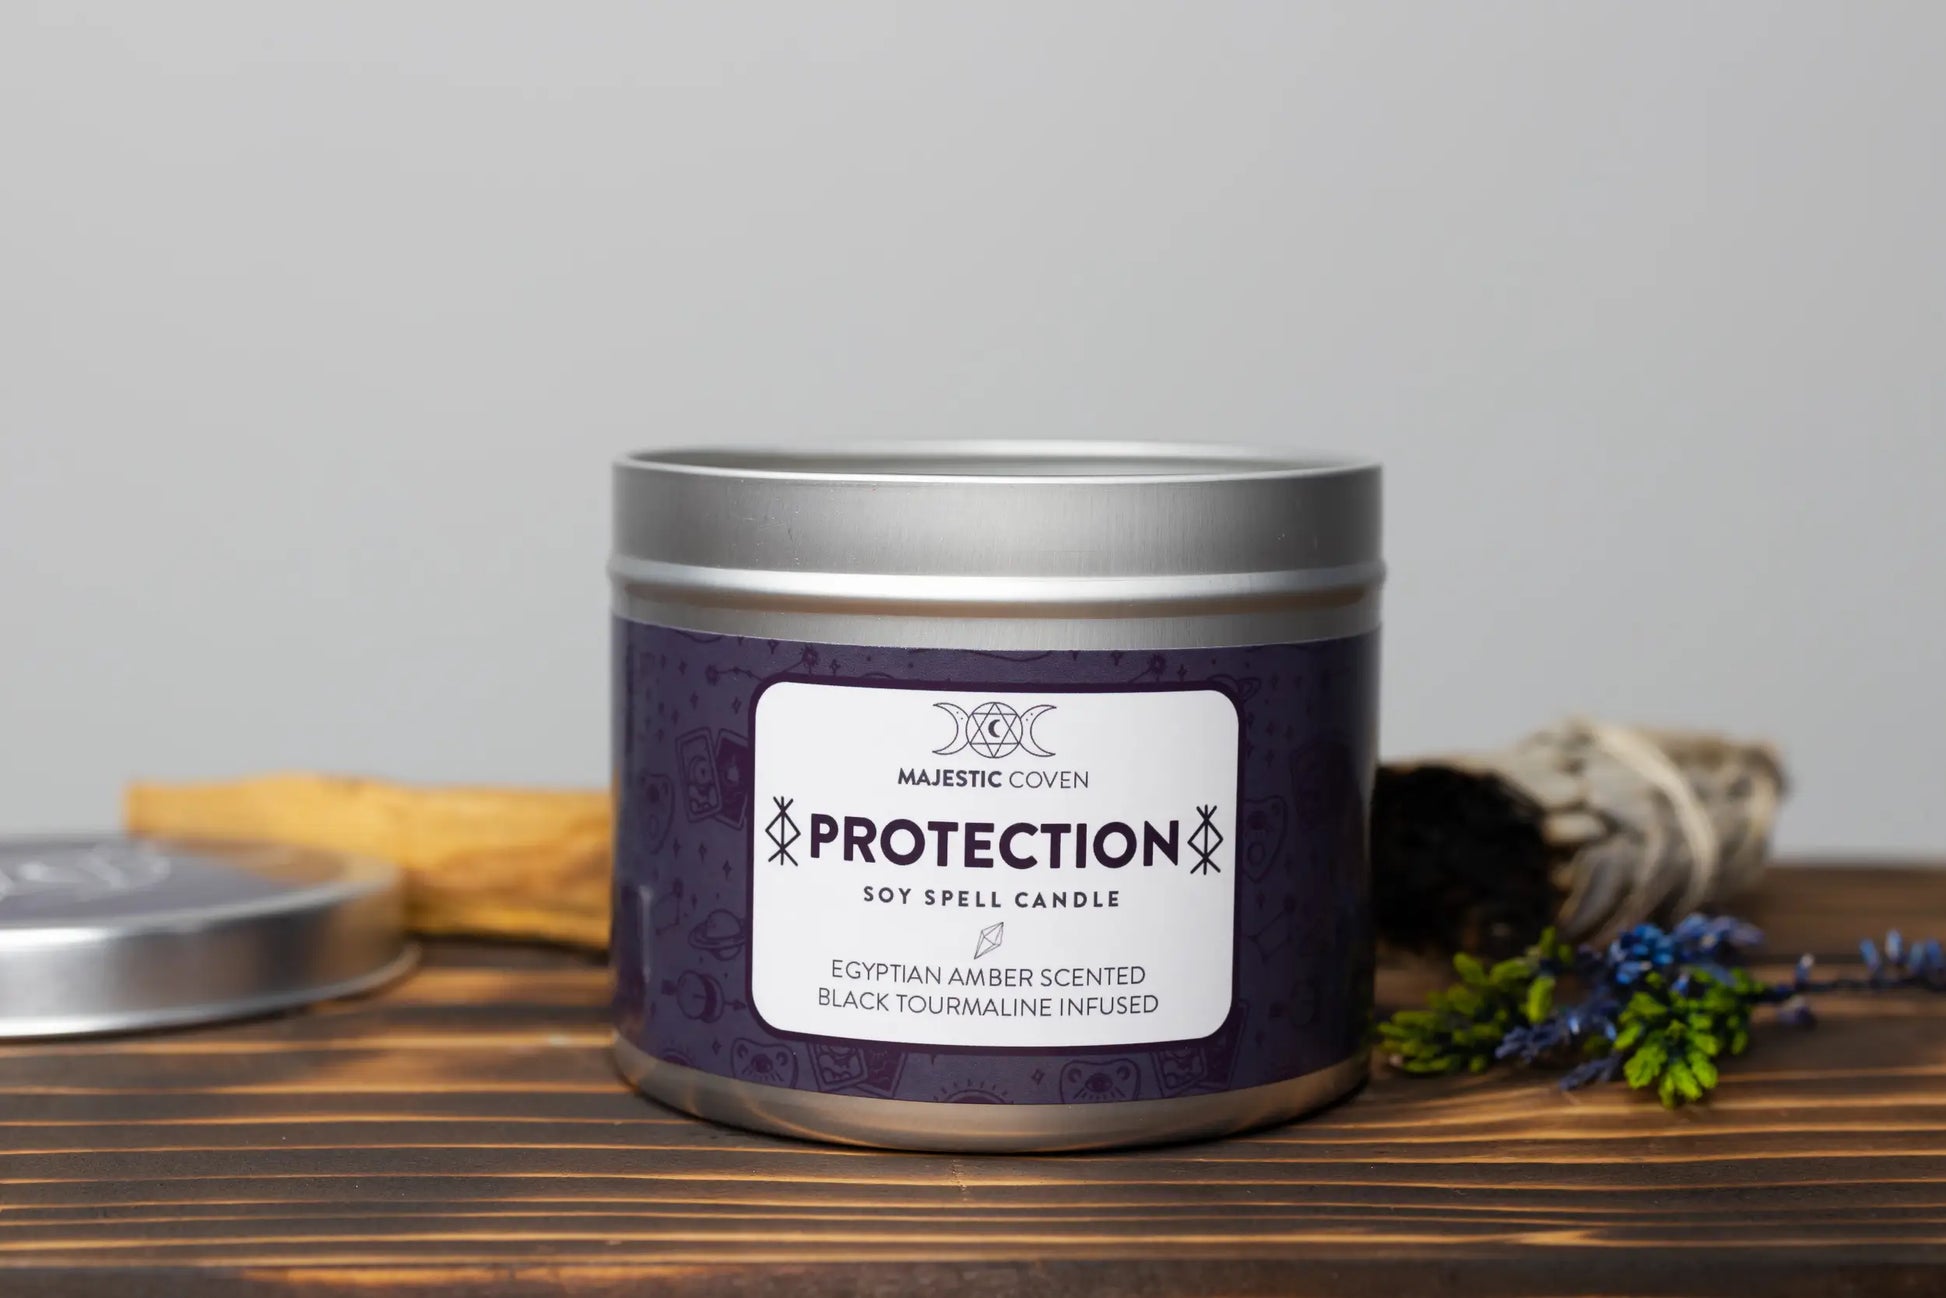 Protection - Black Tourmaline Infused Crystal Soy Candle - Spellbound